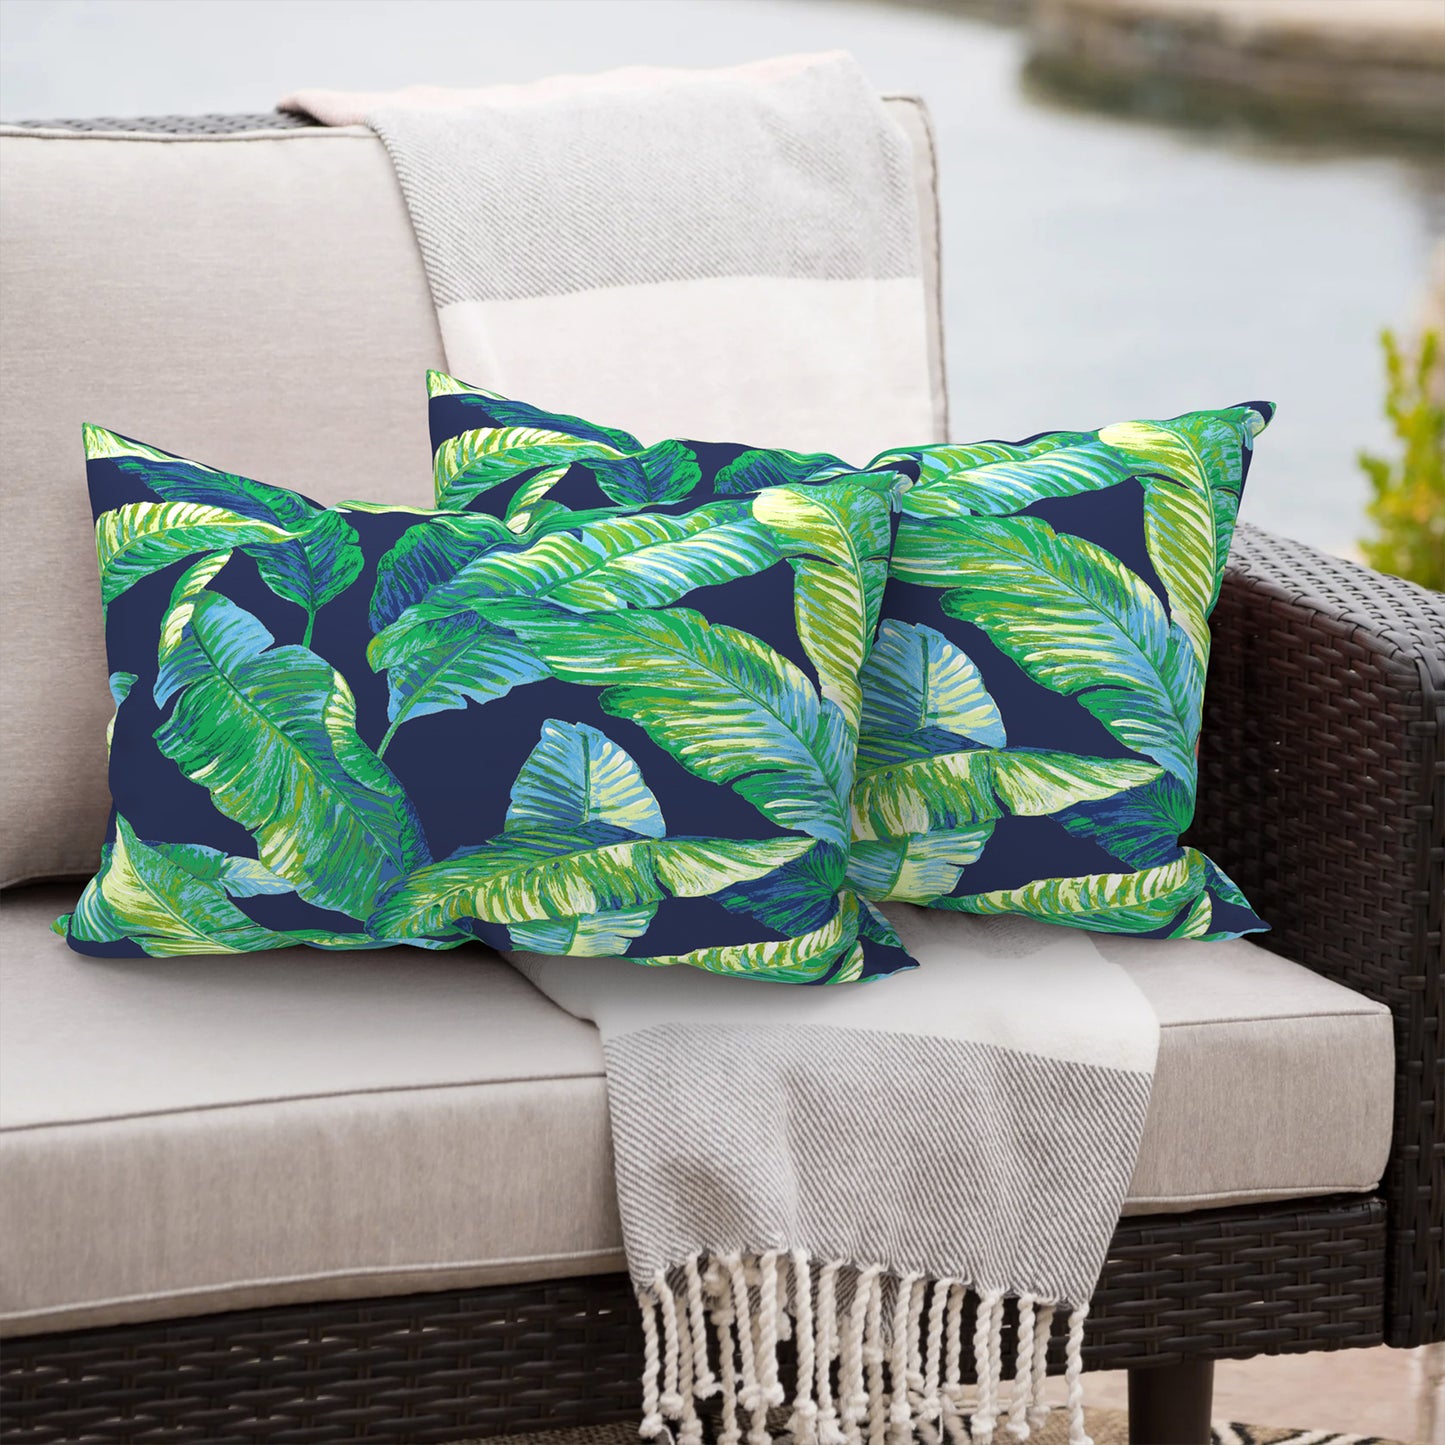 Melody Elephant Outdoor/Indoor Lumbar Pillows, Water Repellent Cushion Pillows, 12x20 Inch, Outdoor Pillows with Inserts for Home Garden, Pack of 2, Hanalei Lagoon